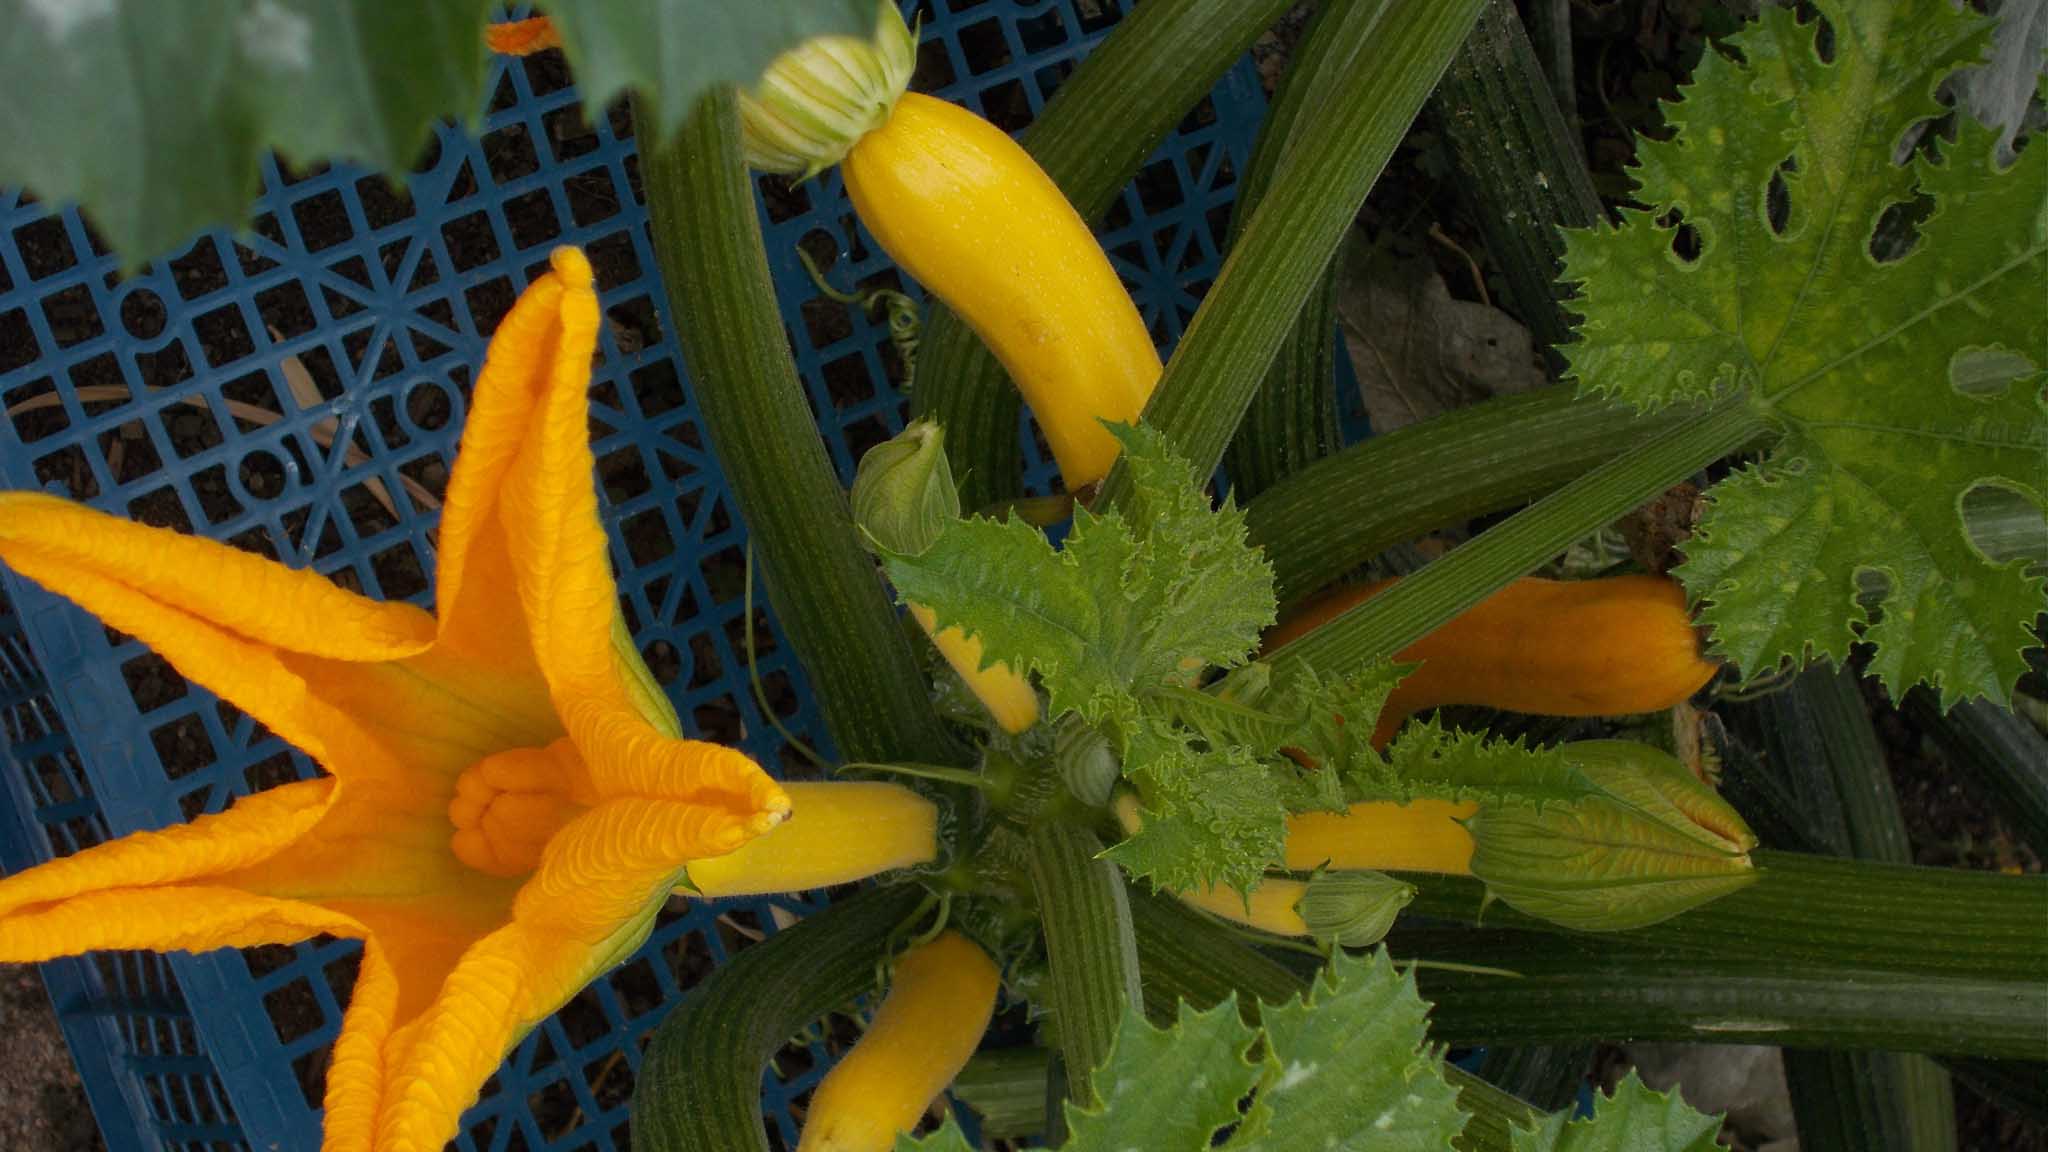 Squash in the Walled Garden greenhouse